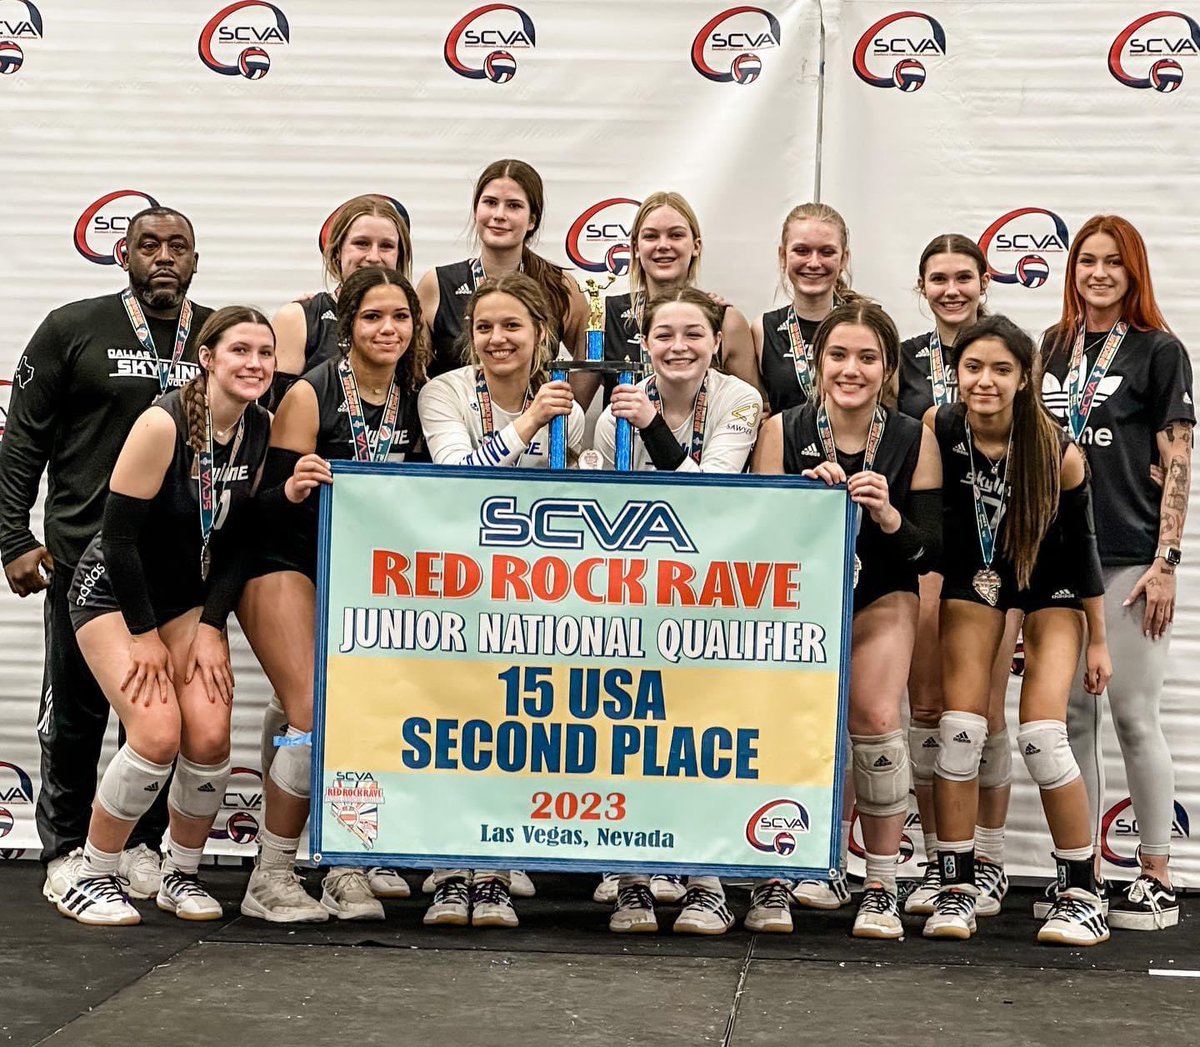 Congratulations to @ihs_vb  Lyla Fisher and her team for taking 🥈in 15 USA at SCVA and qualifying for 2023 USAV GJNC! Great job! 🙌🏻 #KnightsInAction #bidszn